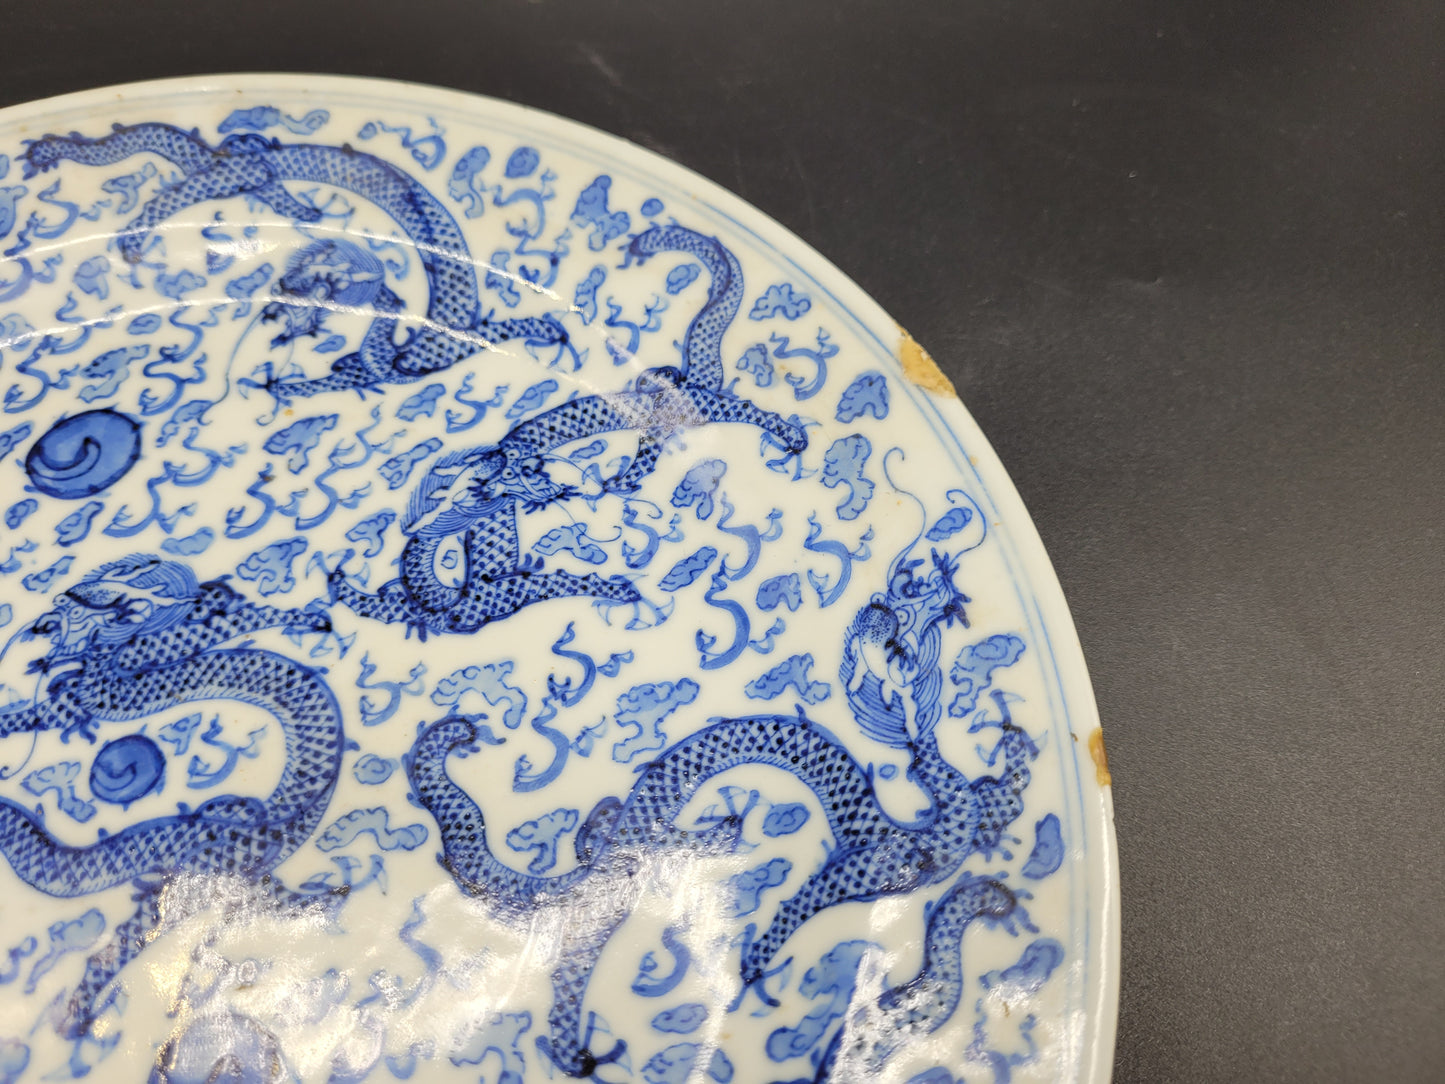 ASIAN ANTIQUES ONLINE Beautiful Chinese Kangxi Period ( 1662-1722 ) Blue and White Dragon Plate 